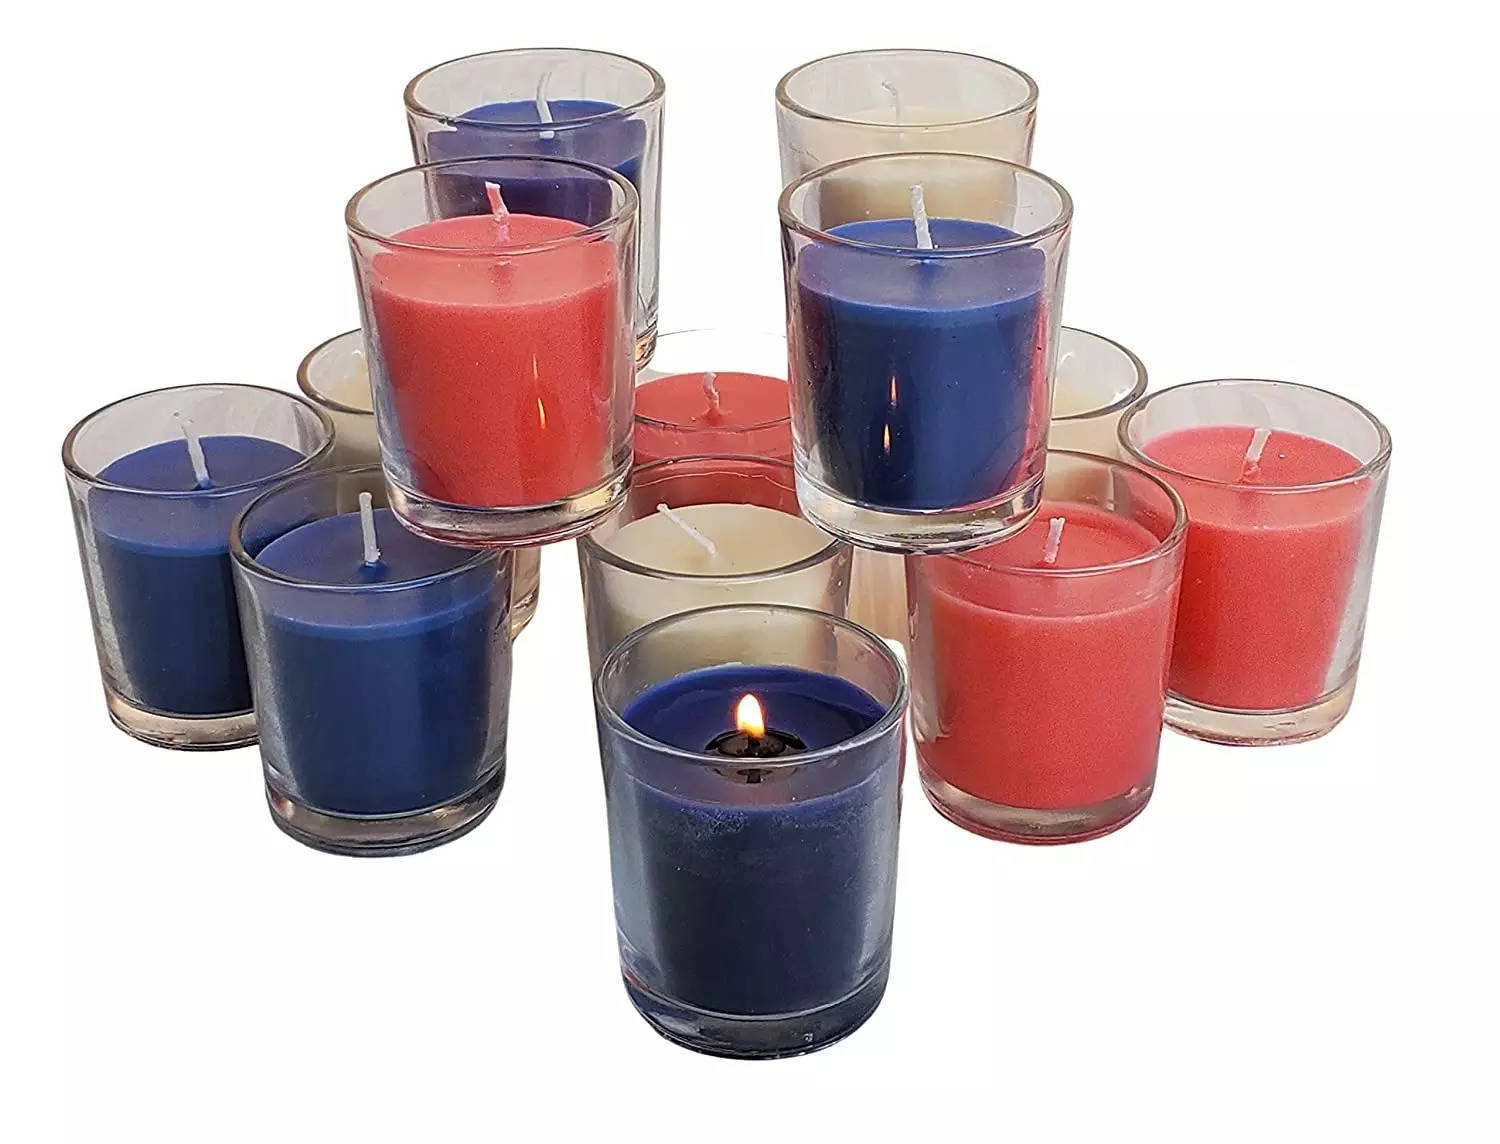 Best scented candles for bedroom decoration in India